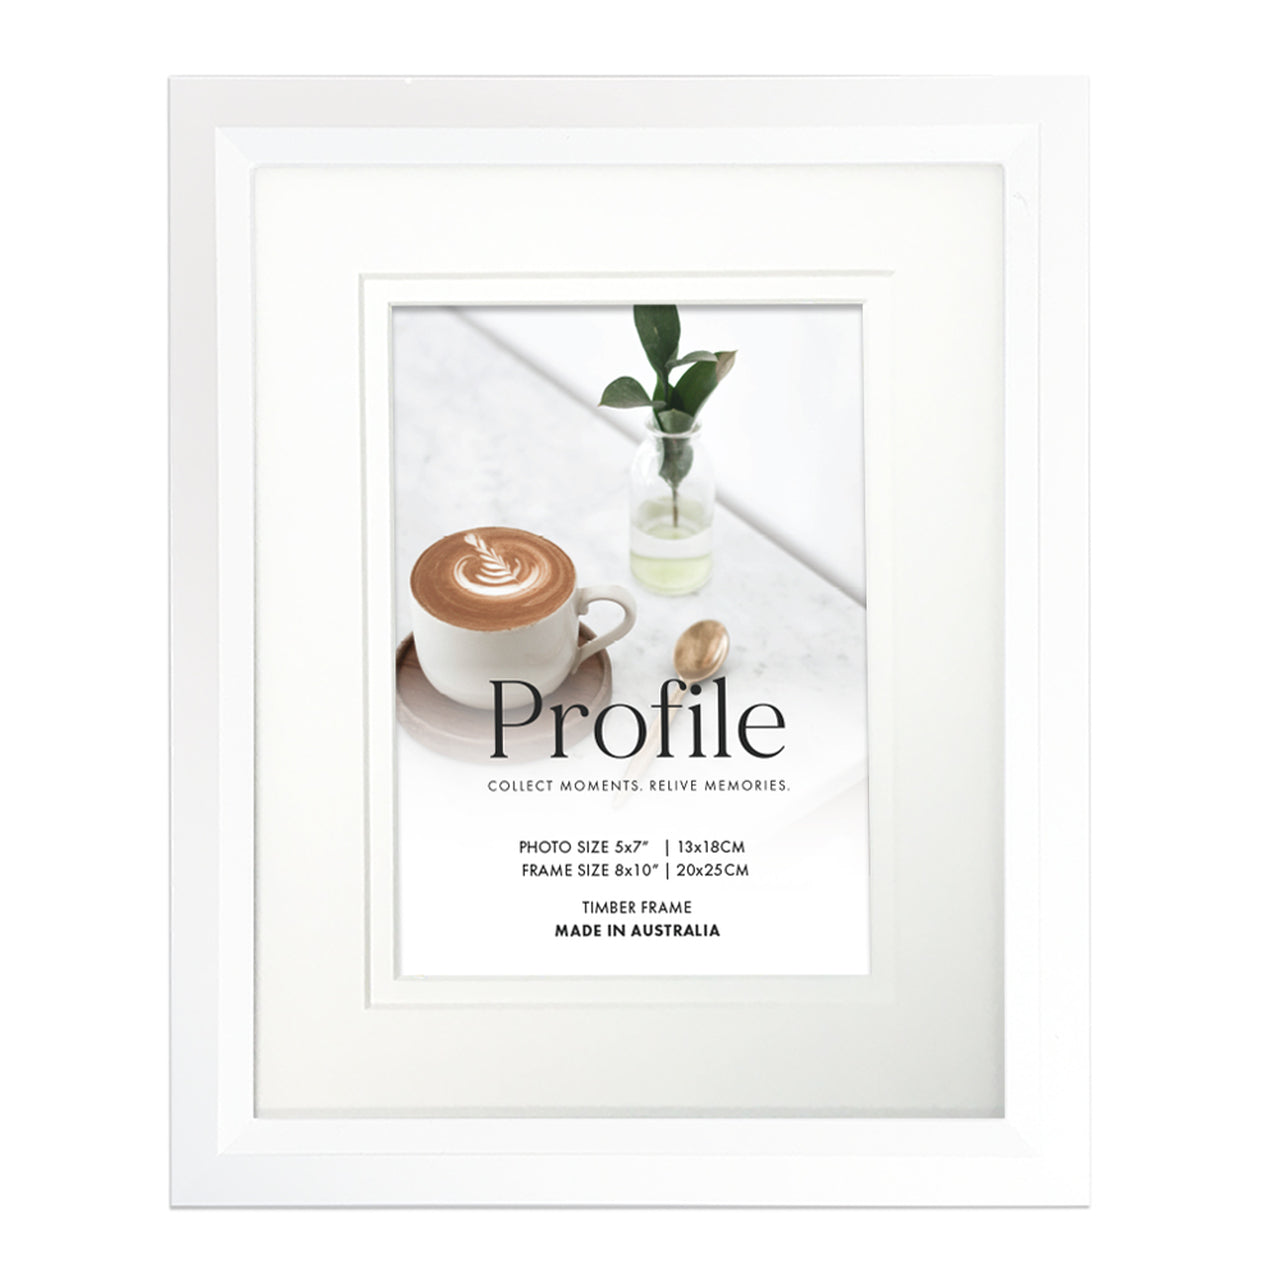 Deluxe Soho White 6x6 Photo Frame with 3x3 opening